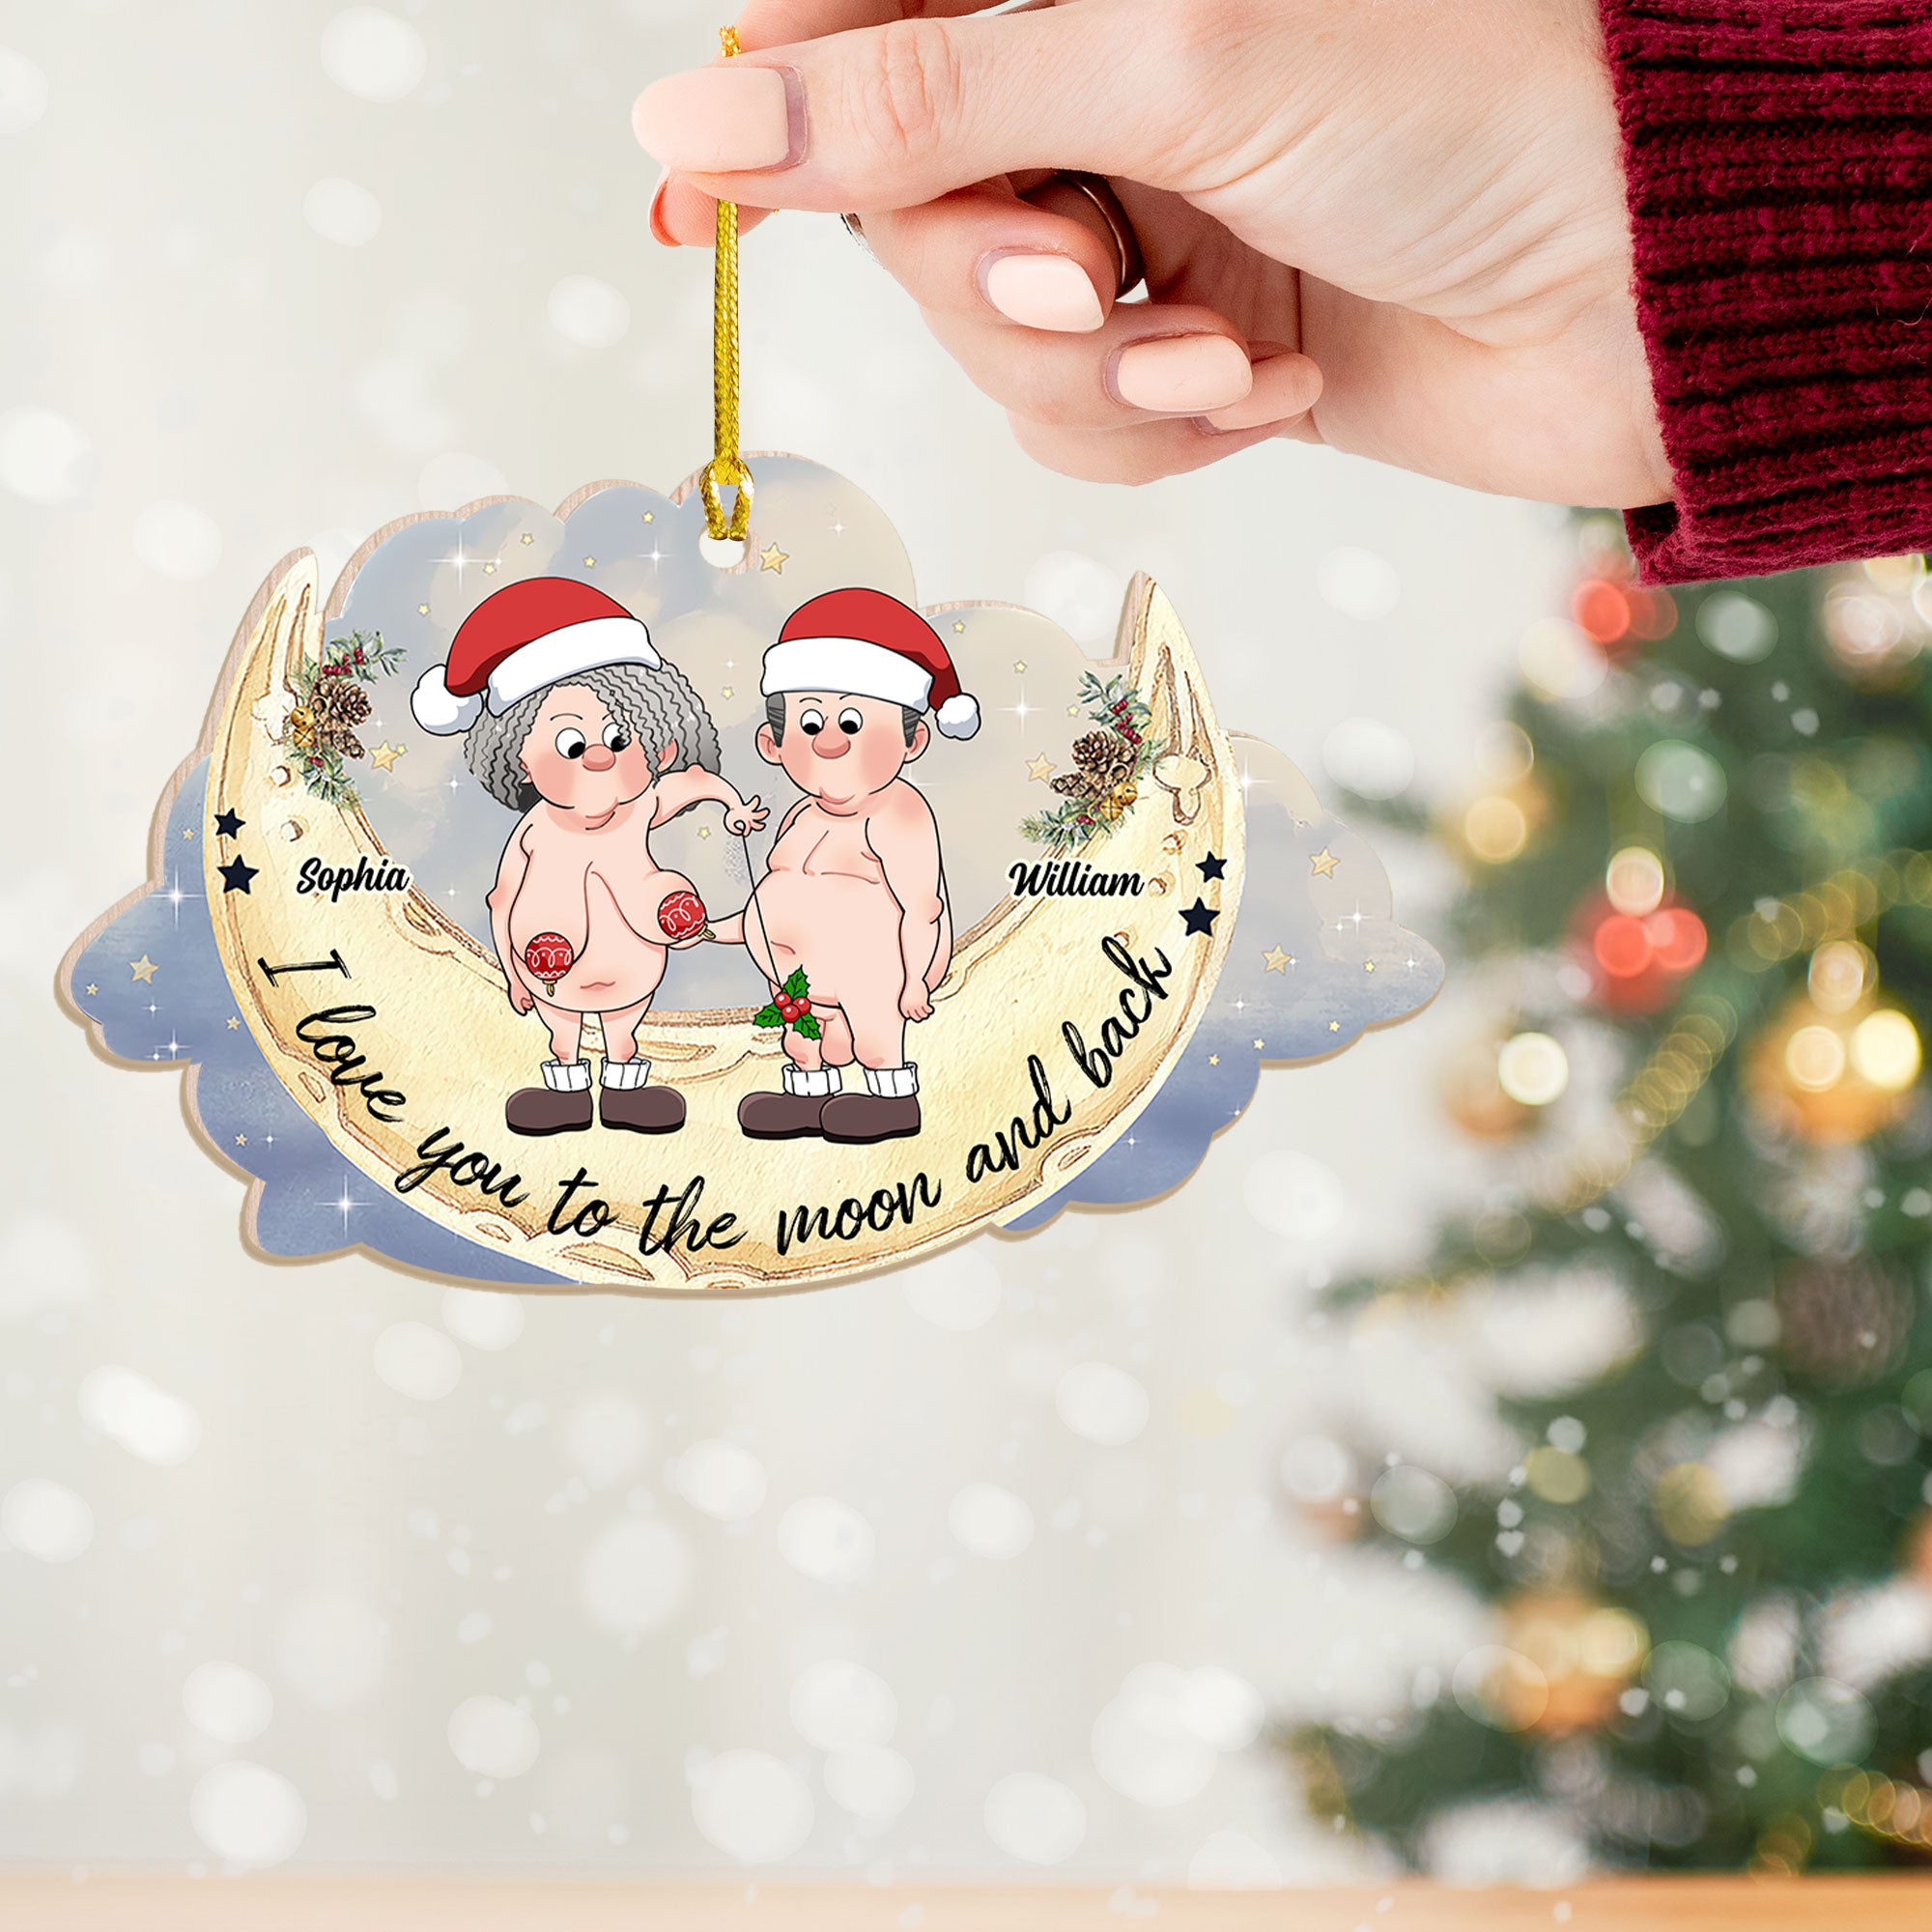 I Love You To The Moon And Back, Funny Couple - Personalized Custom Shaped Wooden Ornament - Gift For Family, Couple Gift